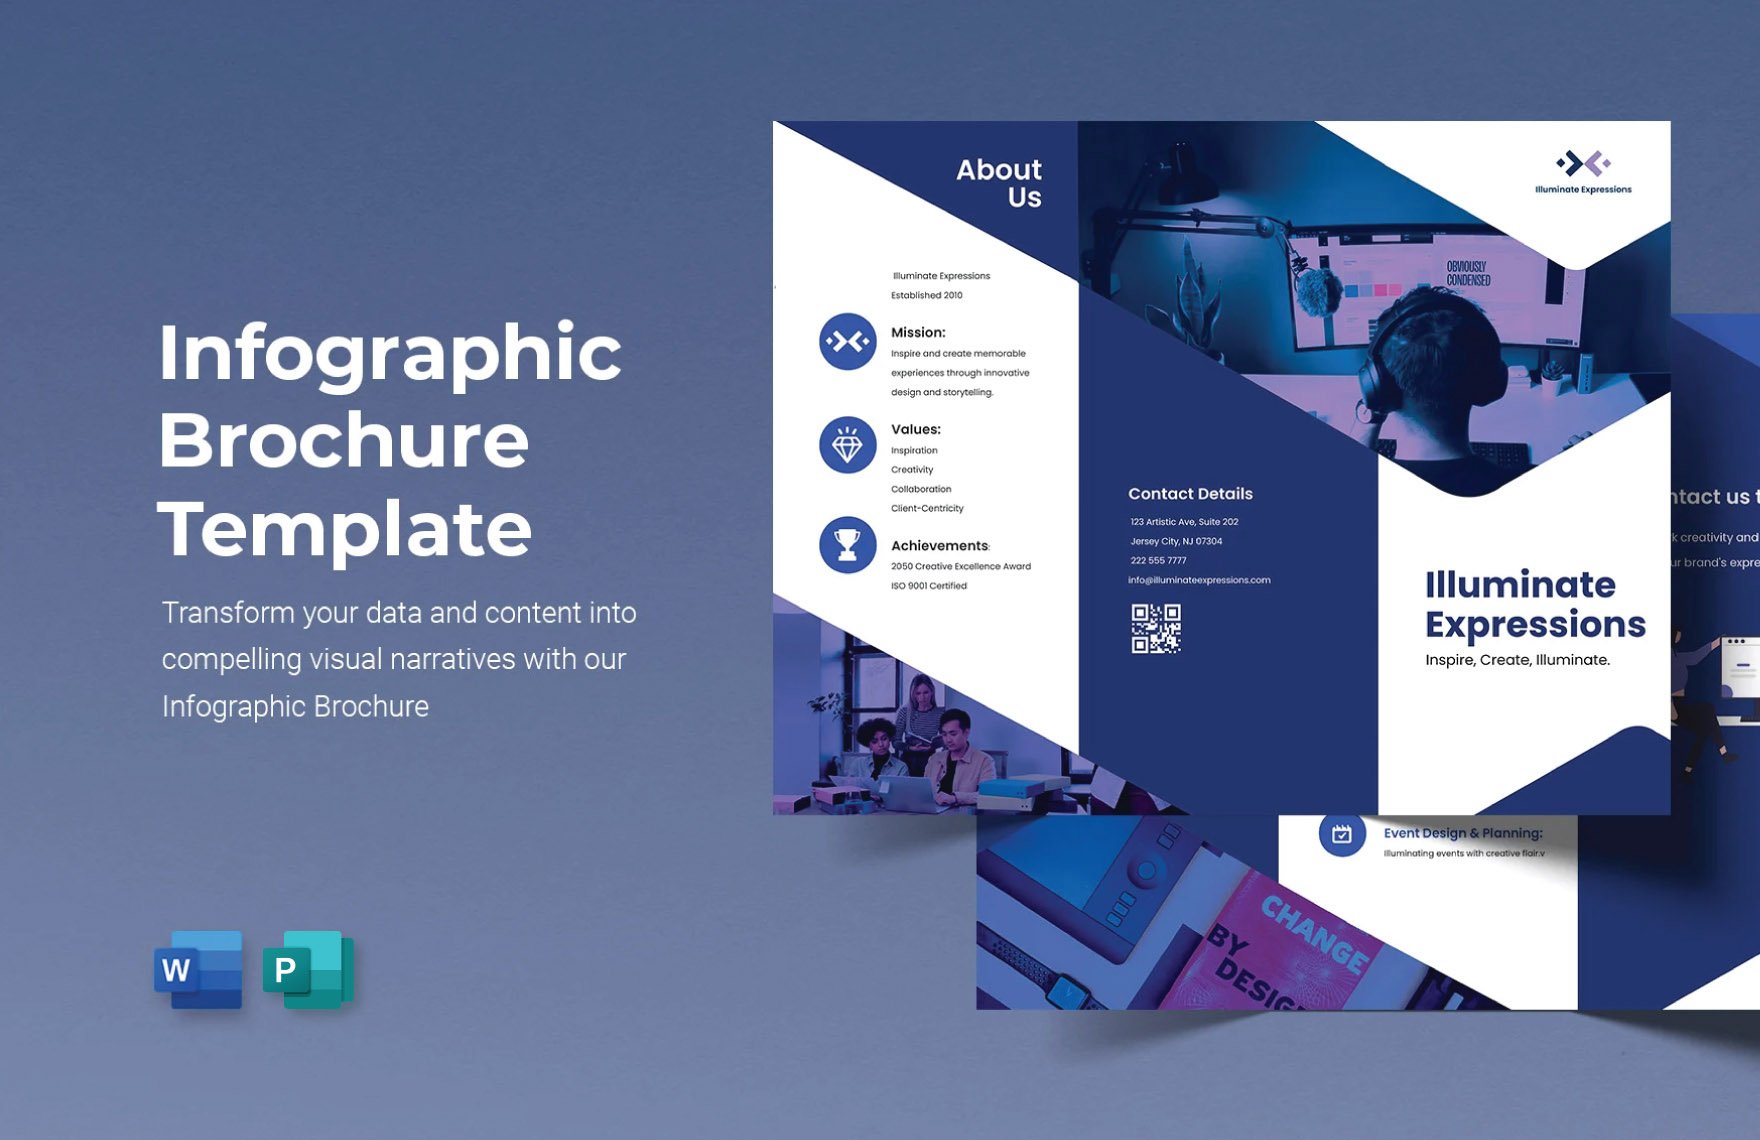 Free Infographic Brochure Template in Word, Publisher